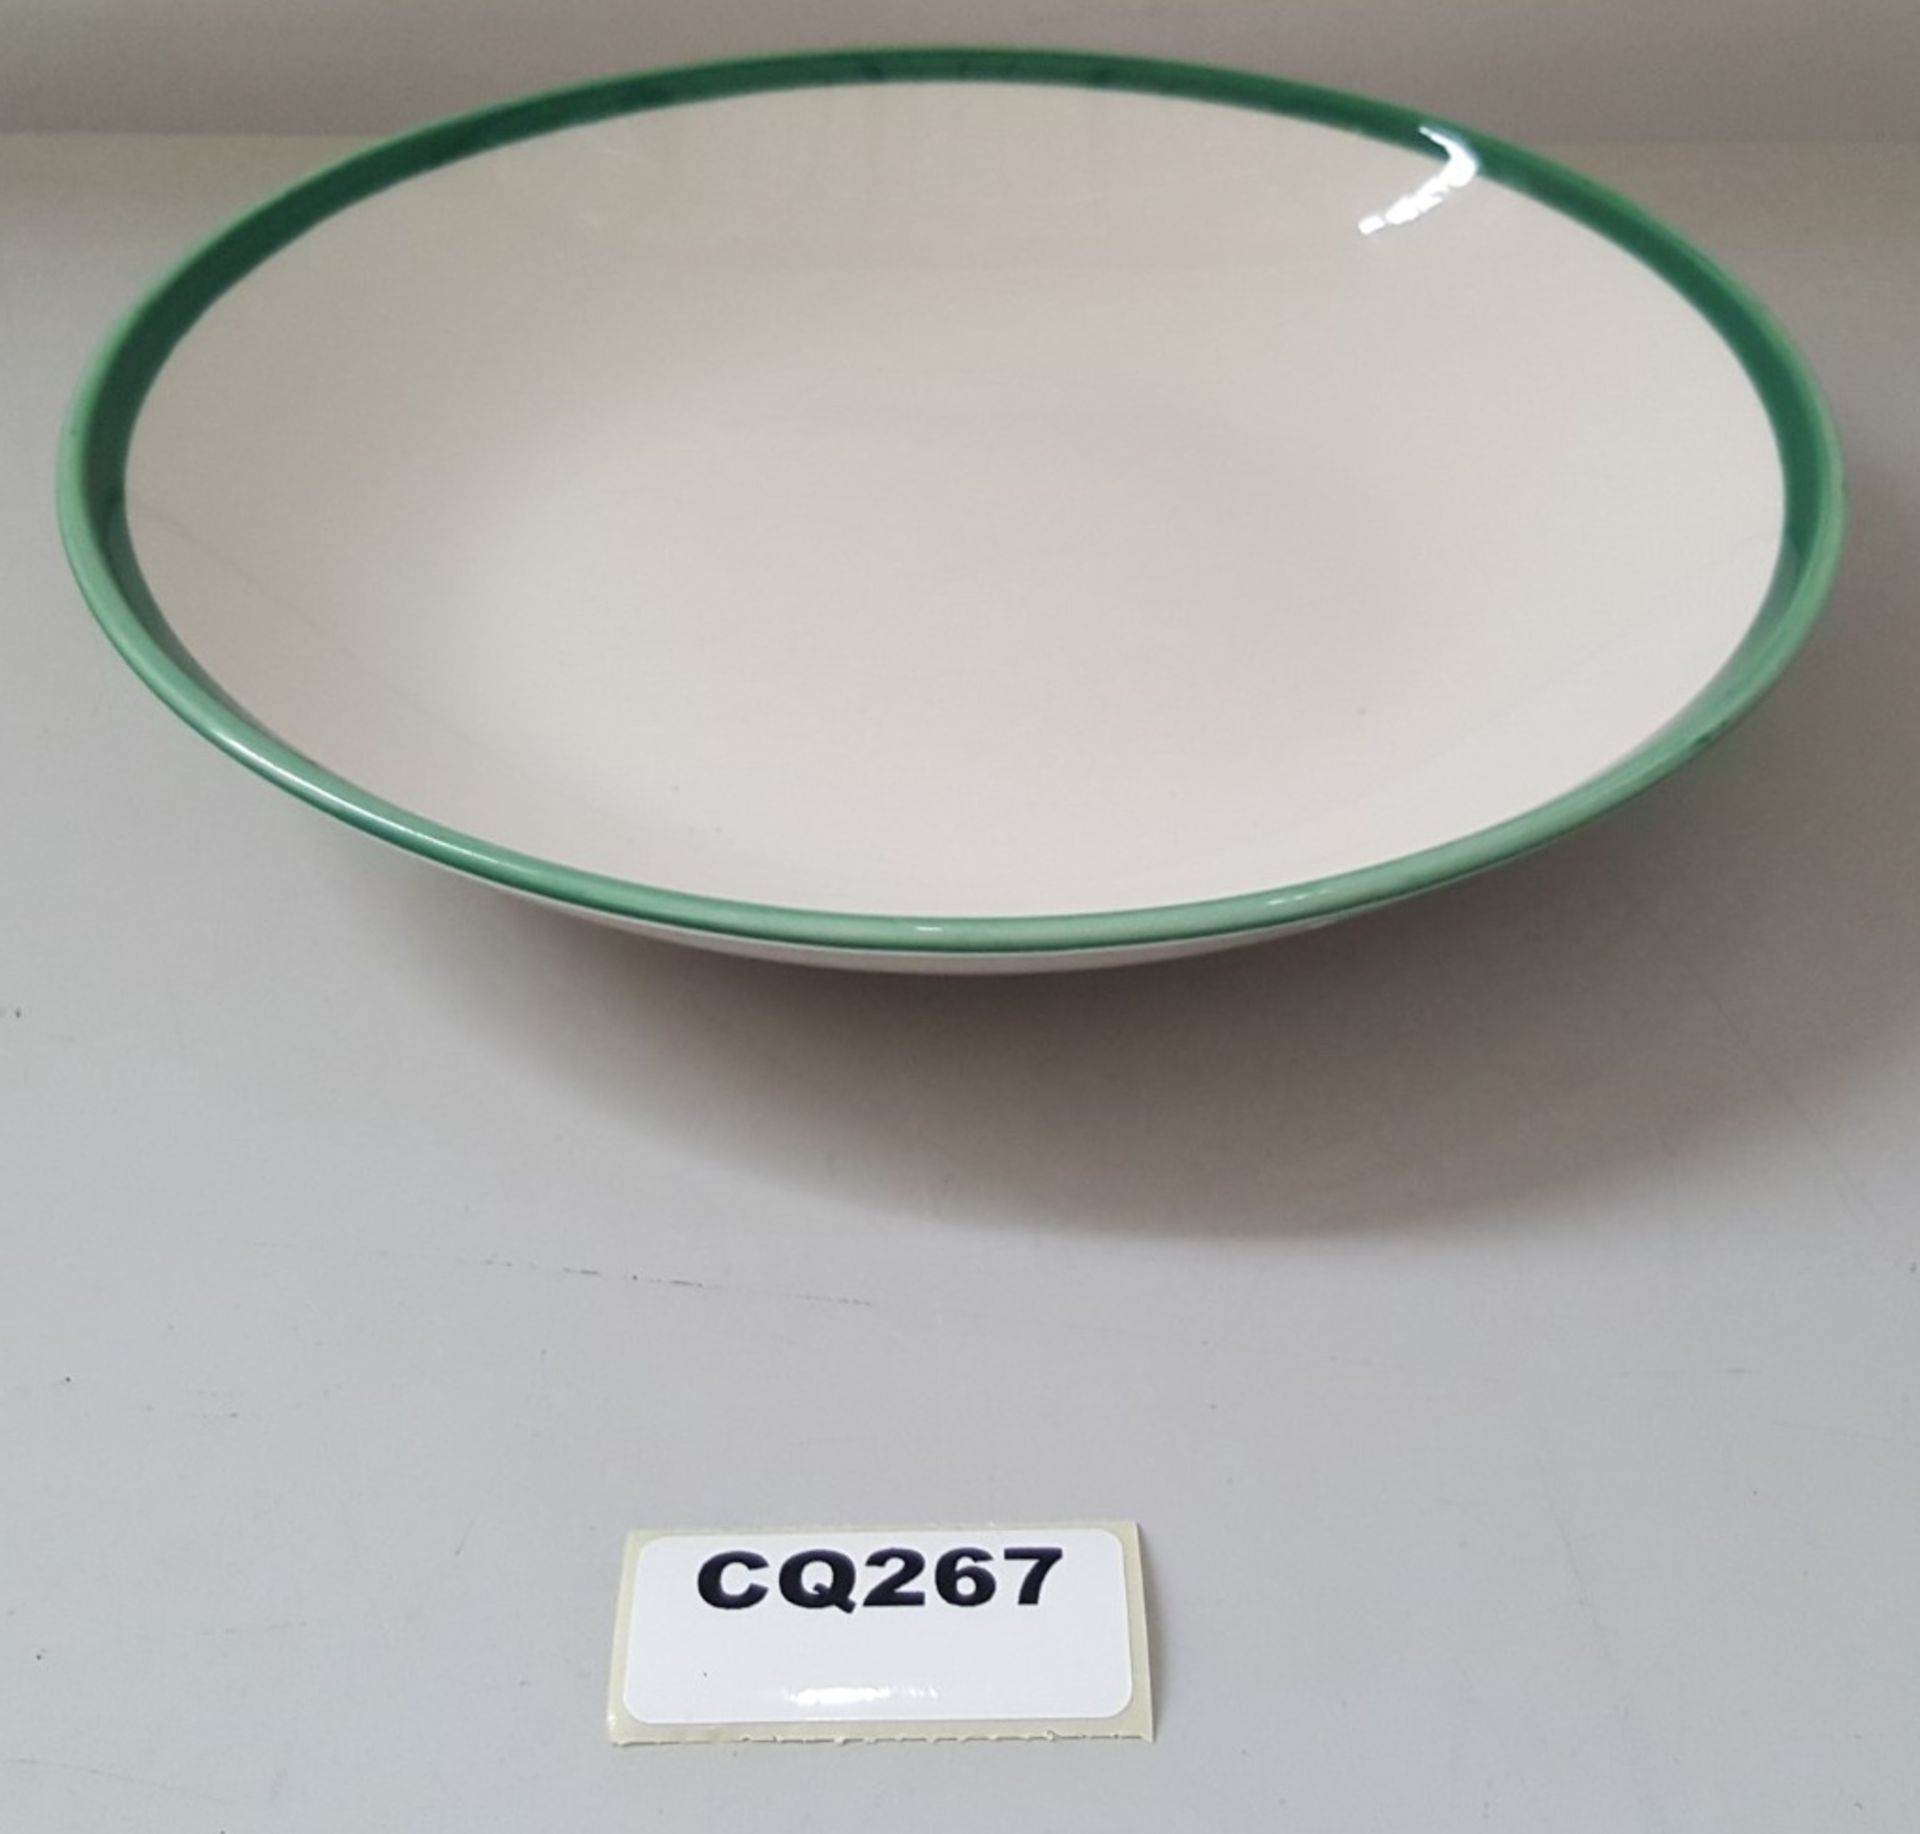 15 x Steelite Coupe Bowls White With Green Outline Egde 25CM - Ref CQ267 - Image 4 of 5